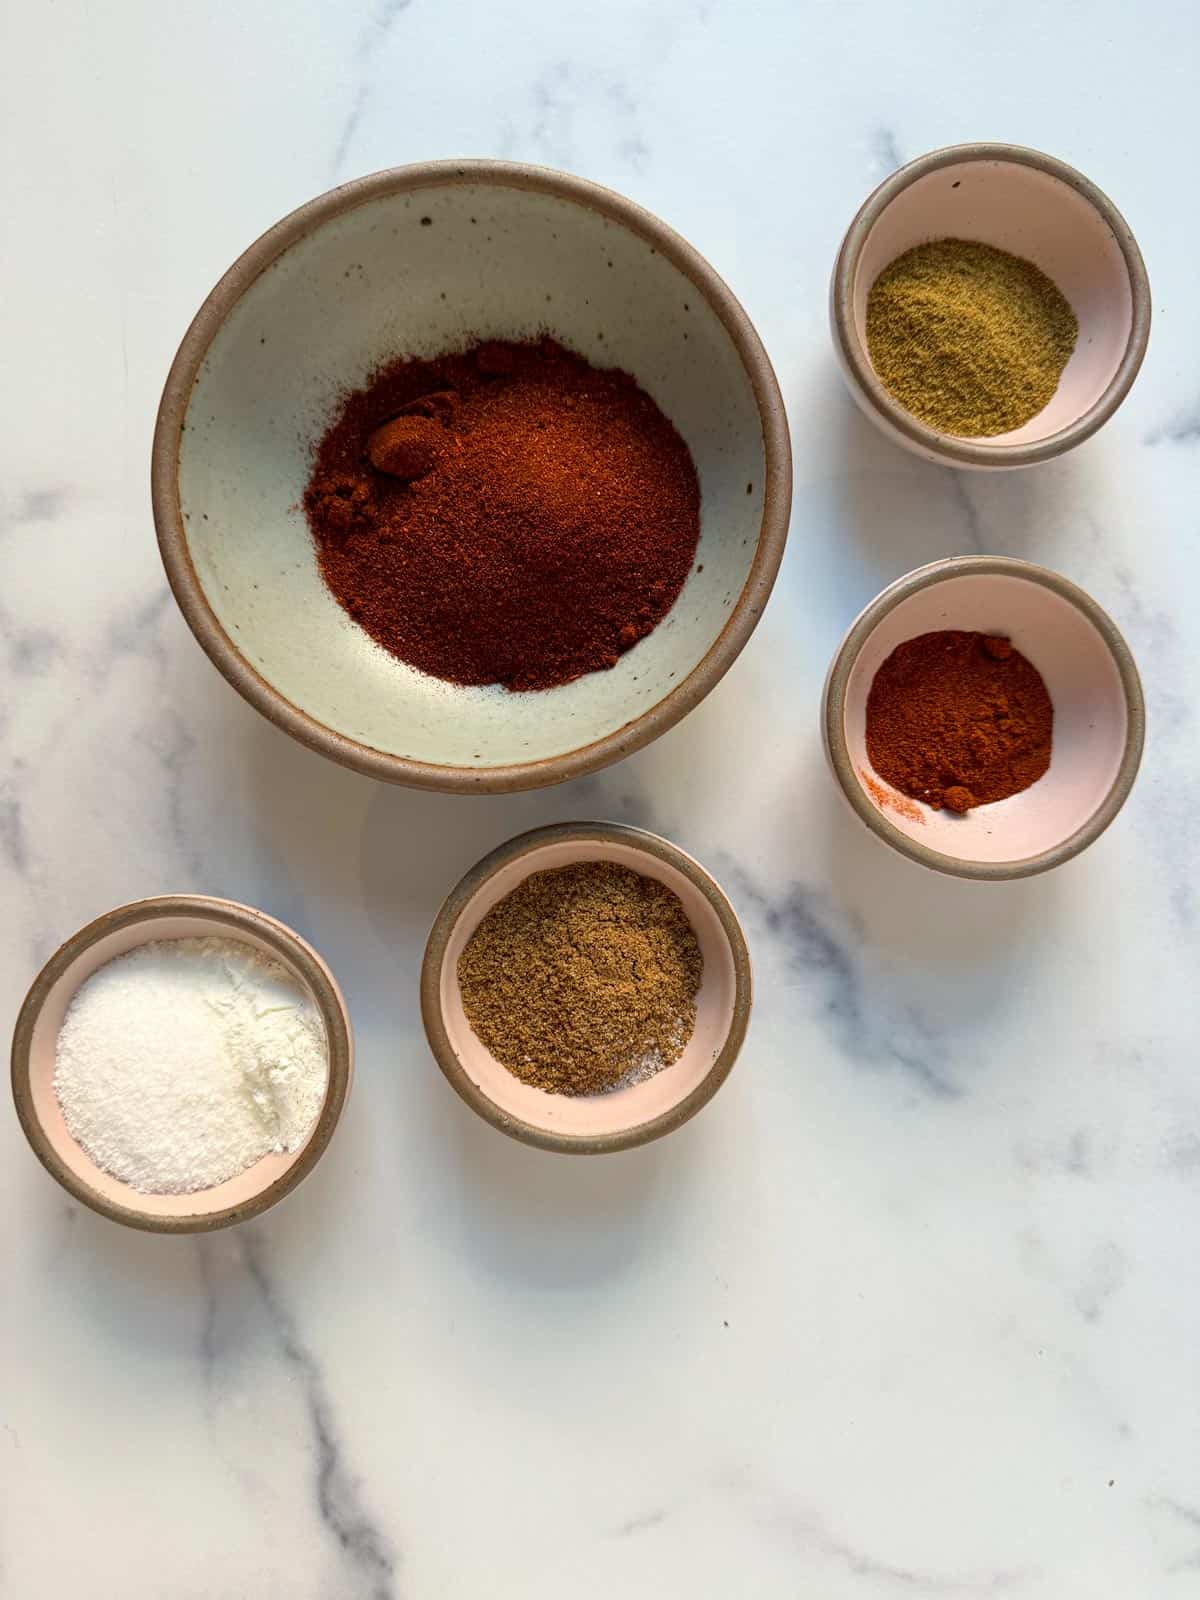 Homemade Mild Taco Seasoning Ingredients in small bowls on a marble countertop.